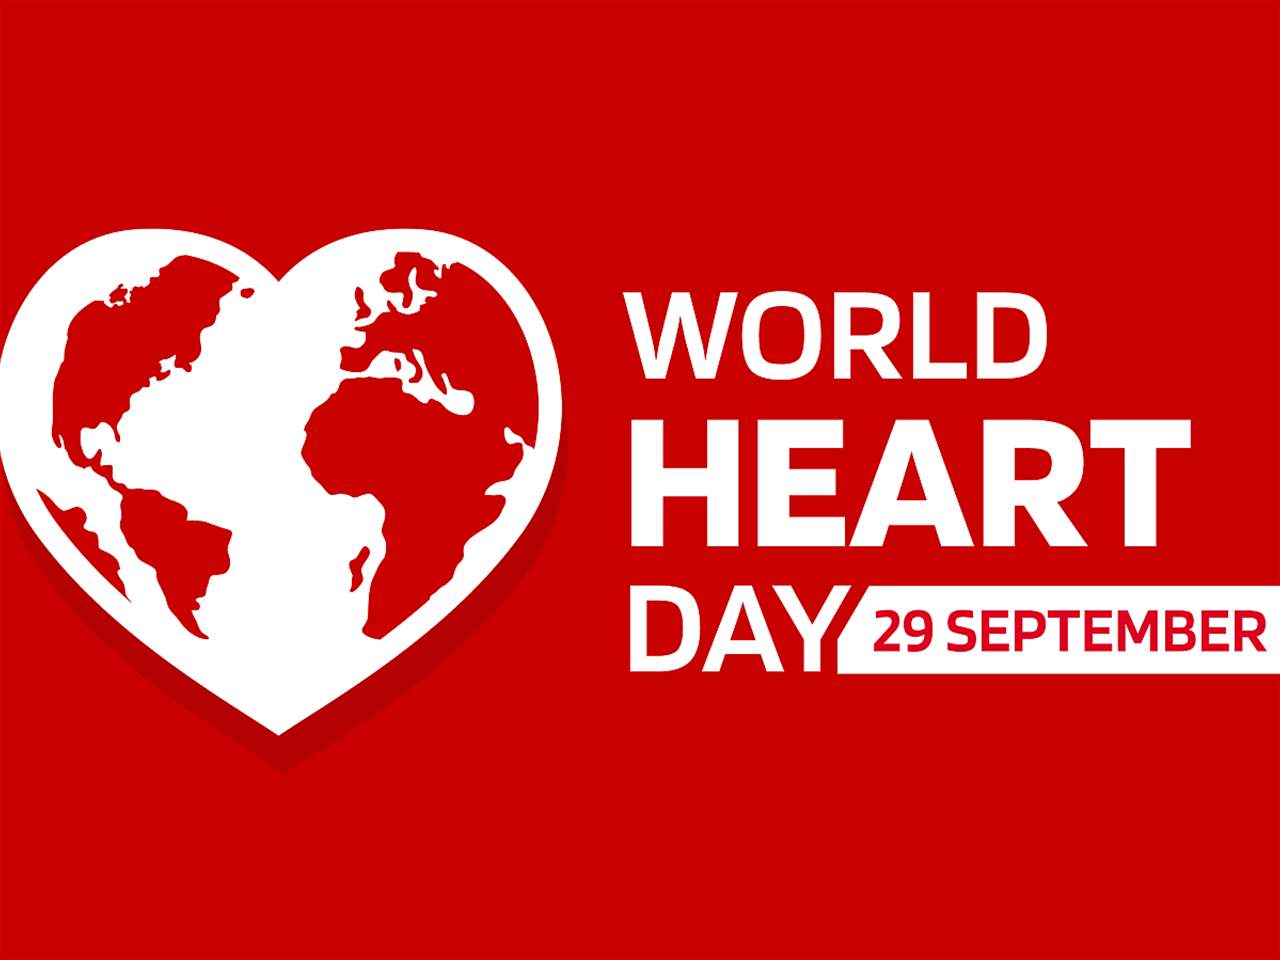 Taking Action on World Heart Day: Protecting Your Heart and Health